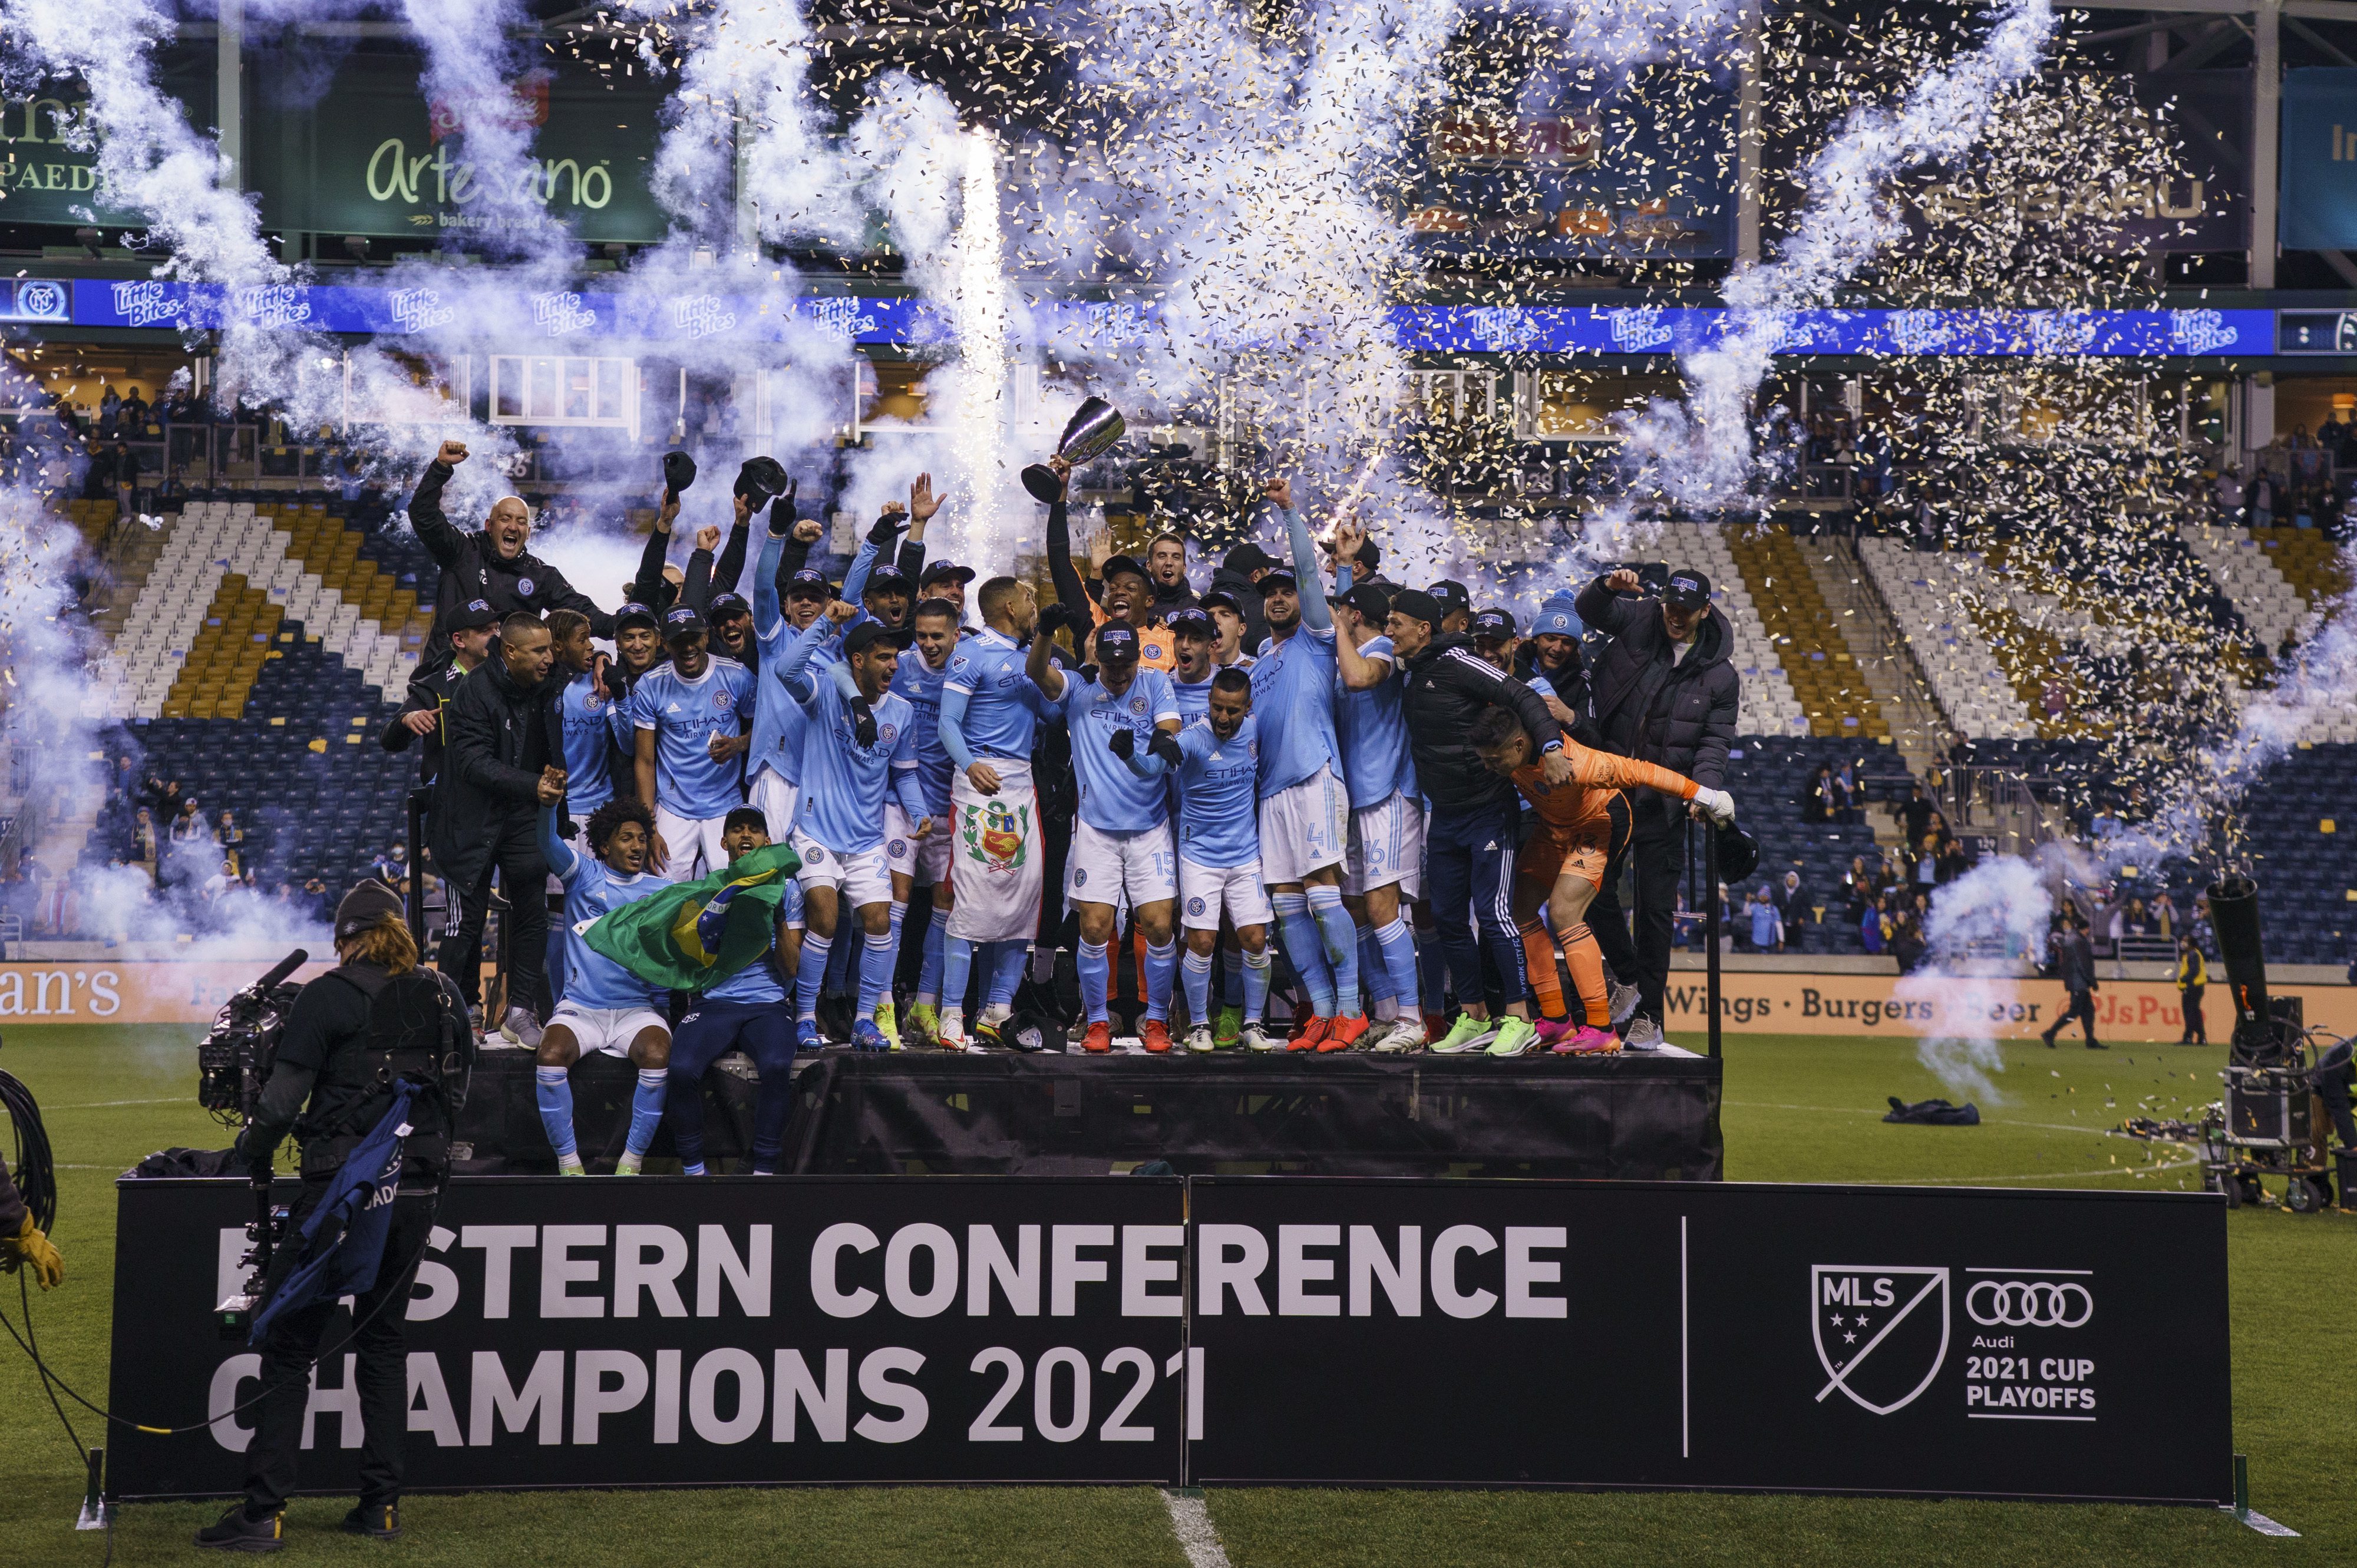 Philadelphia heads to MLS Cup final with 3-1 win over NYCFC - WHYY